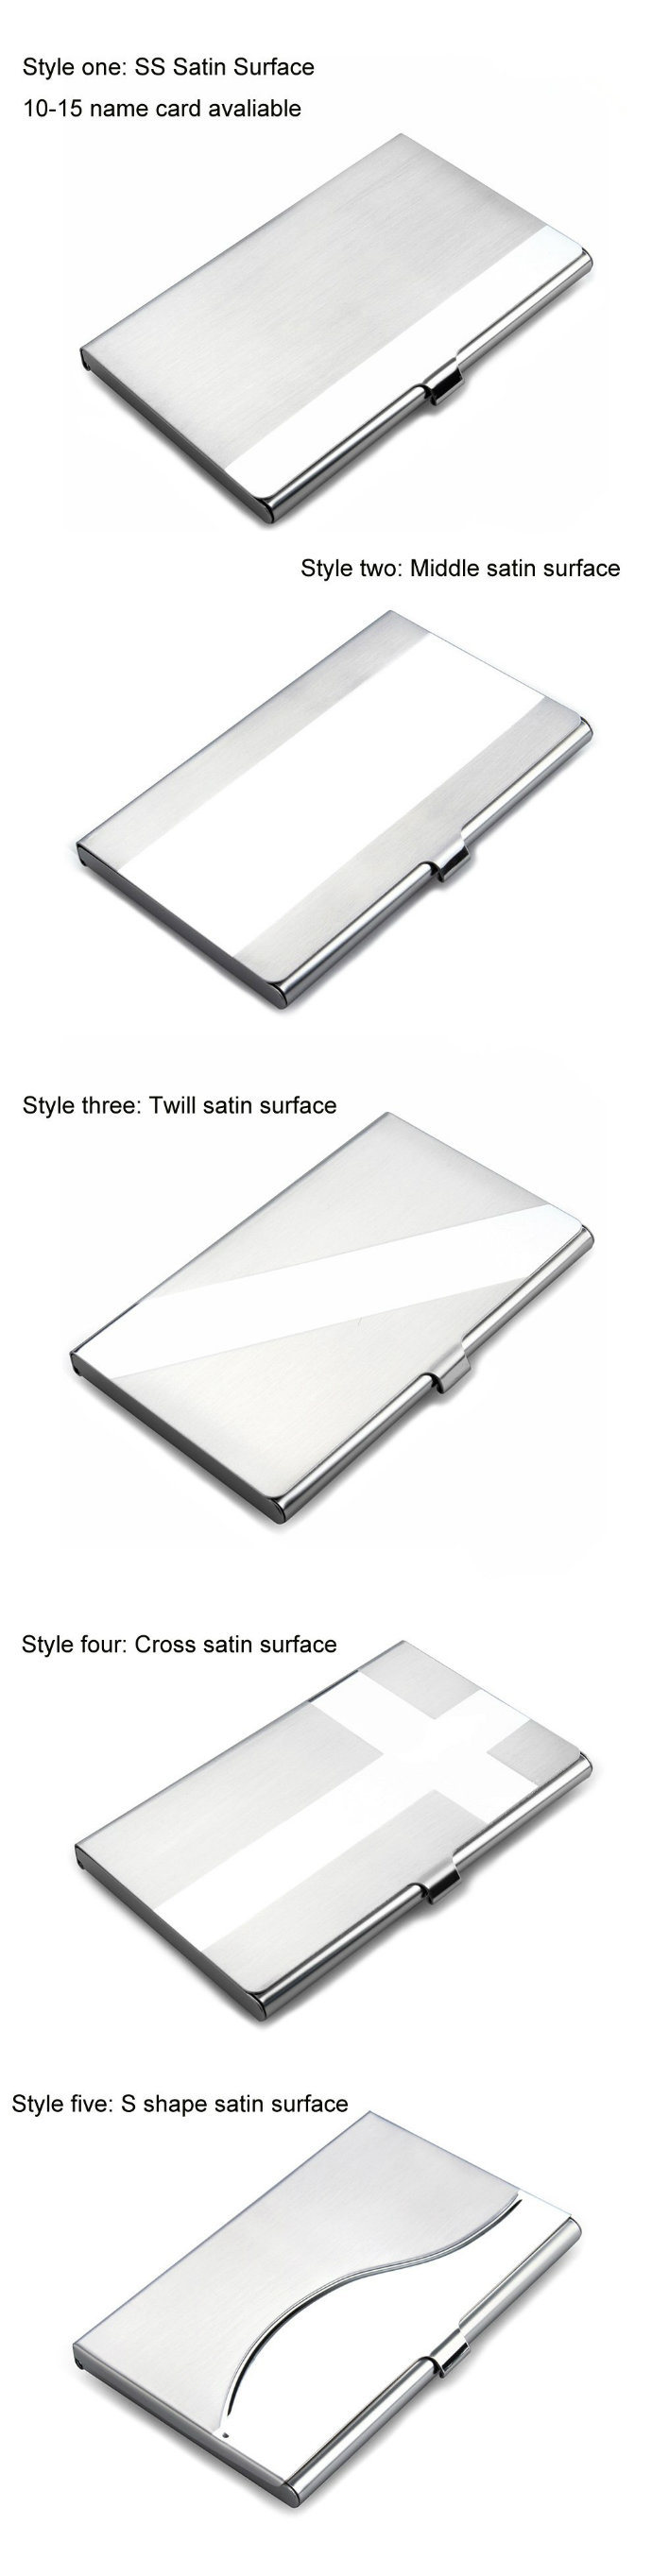 Hot Sell Promotional Stainless Steel Business Name Case Cardholder